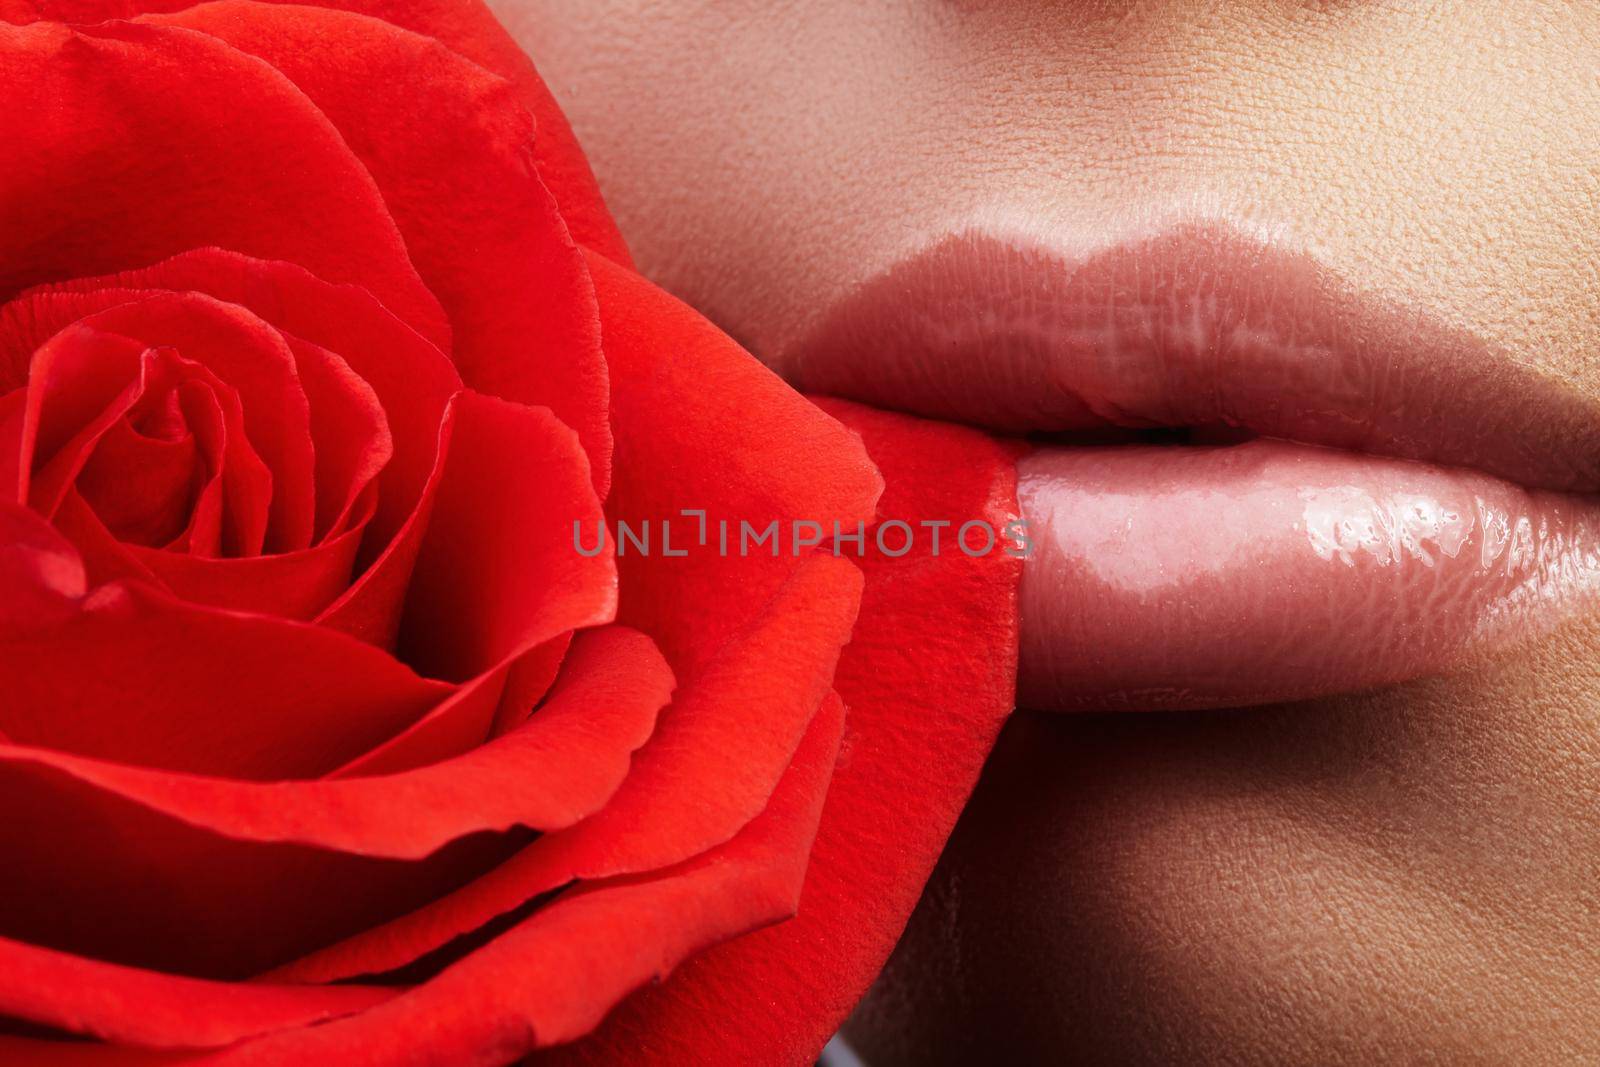 Close-up beautiful female lips with bright lipgloss makeup. Perfect clean skin, light fresh lip make-up. Beautiful spa portrait with red rose flower. Spa and cosmetics